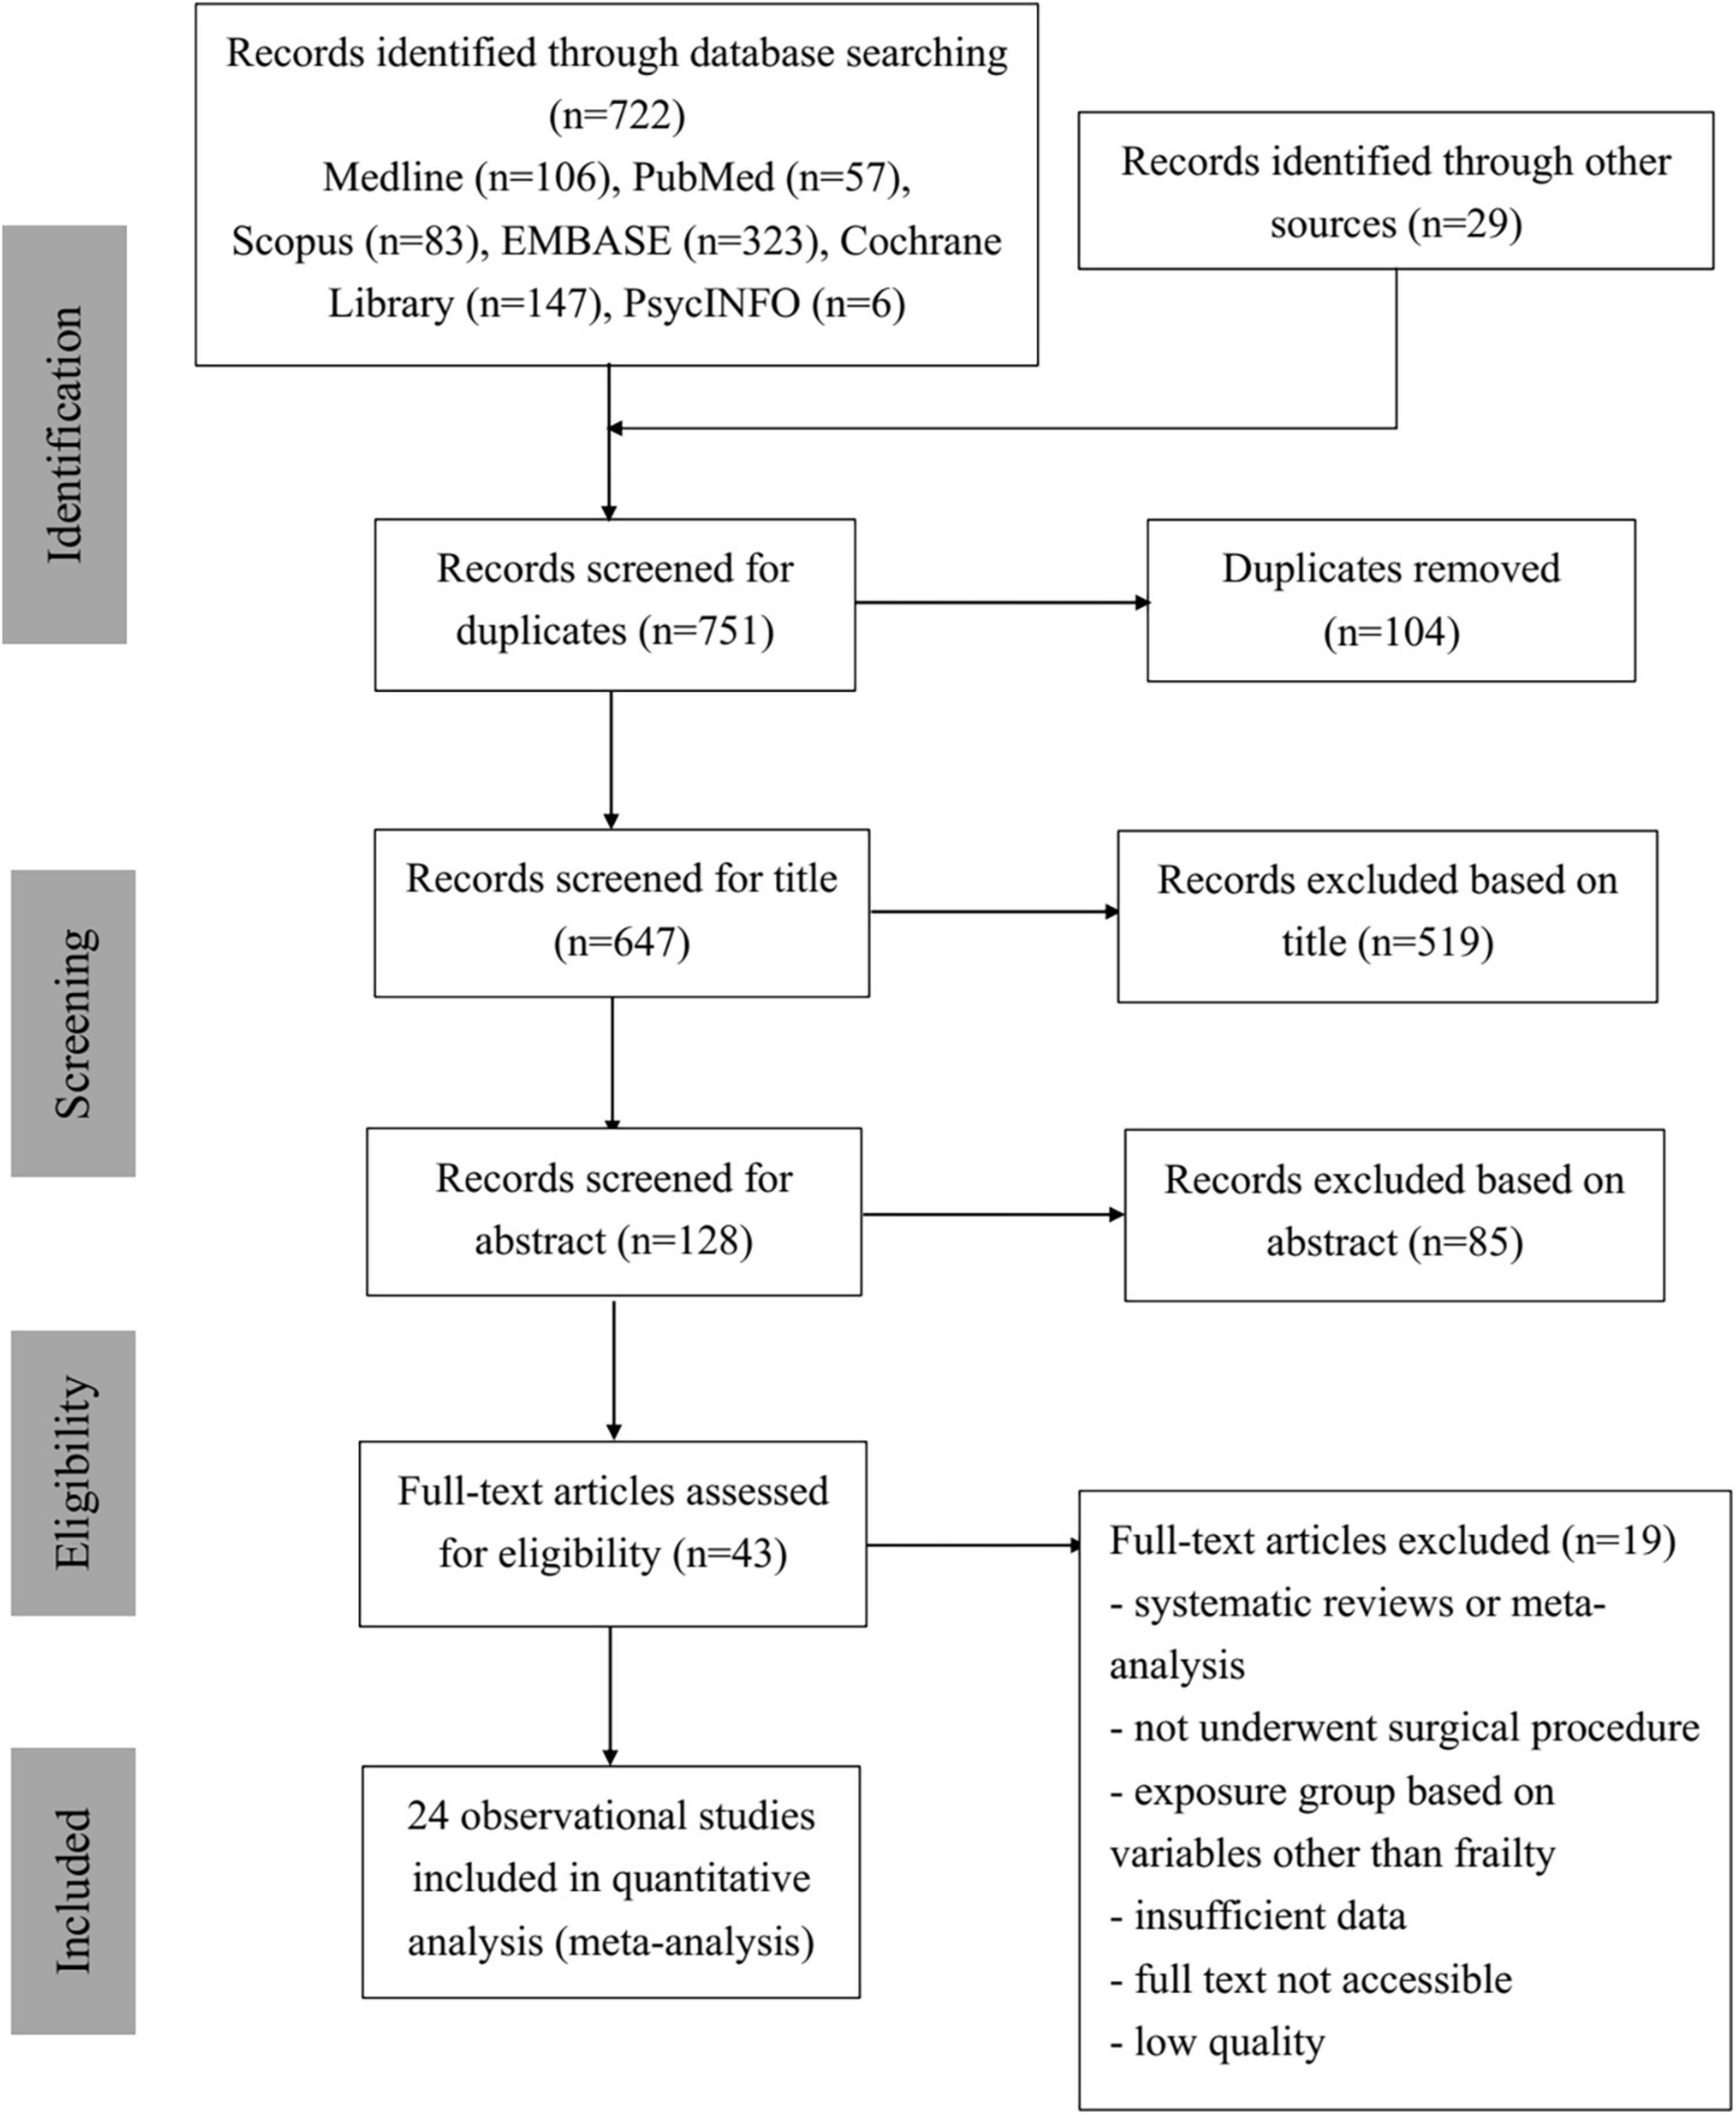 Frailty score and outcomes of patients undergoing vascular surgery and amputation: A systematic review and meta-analysis